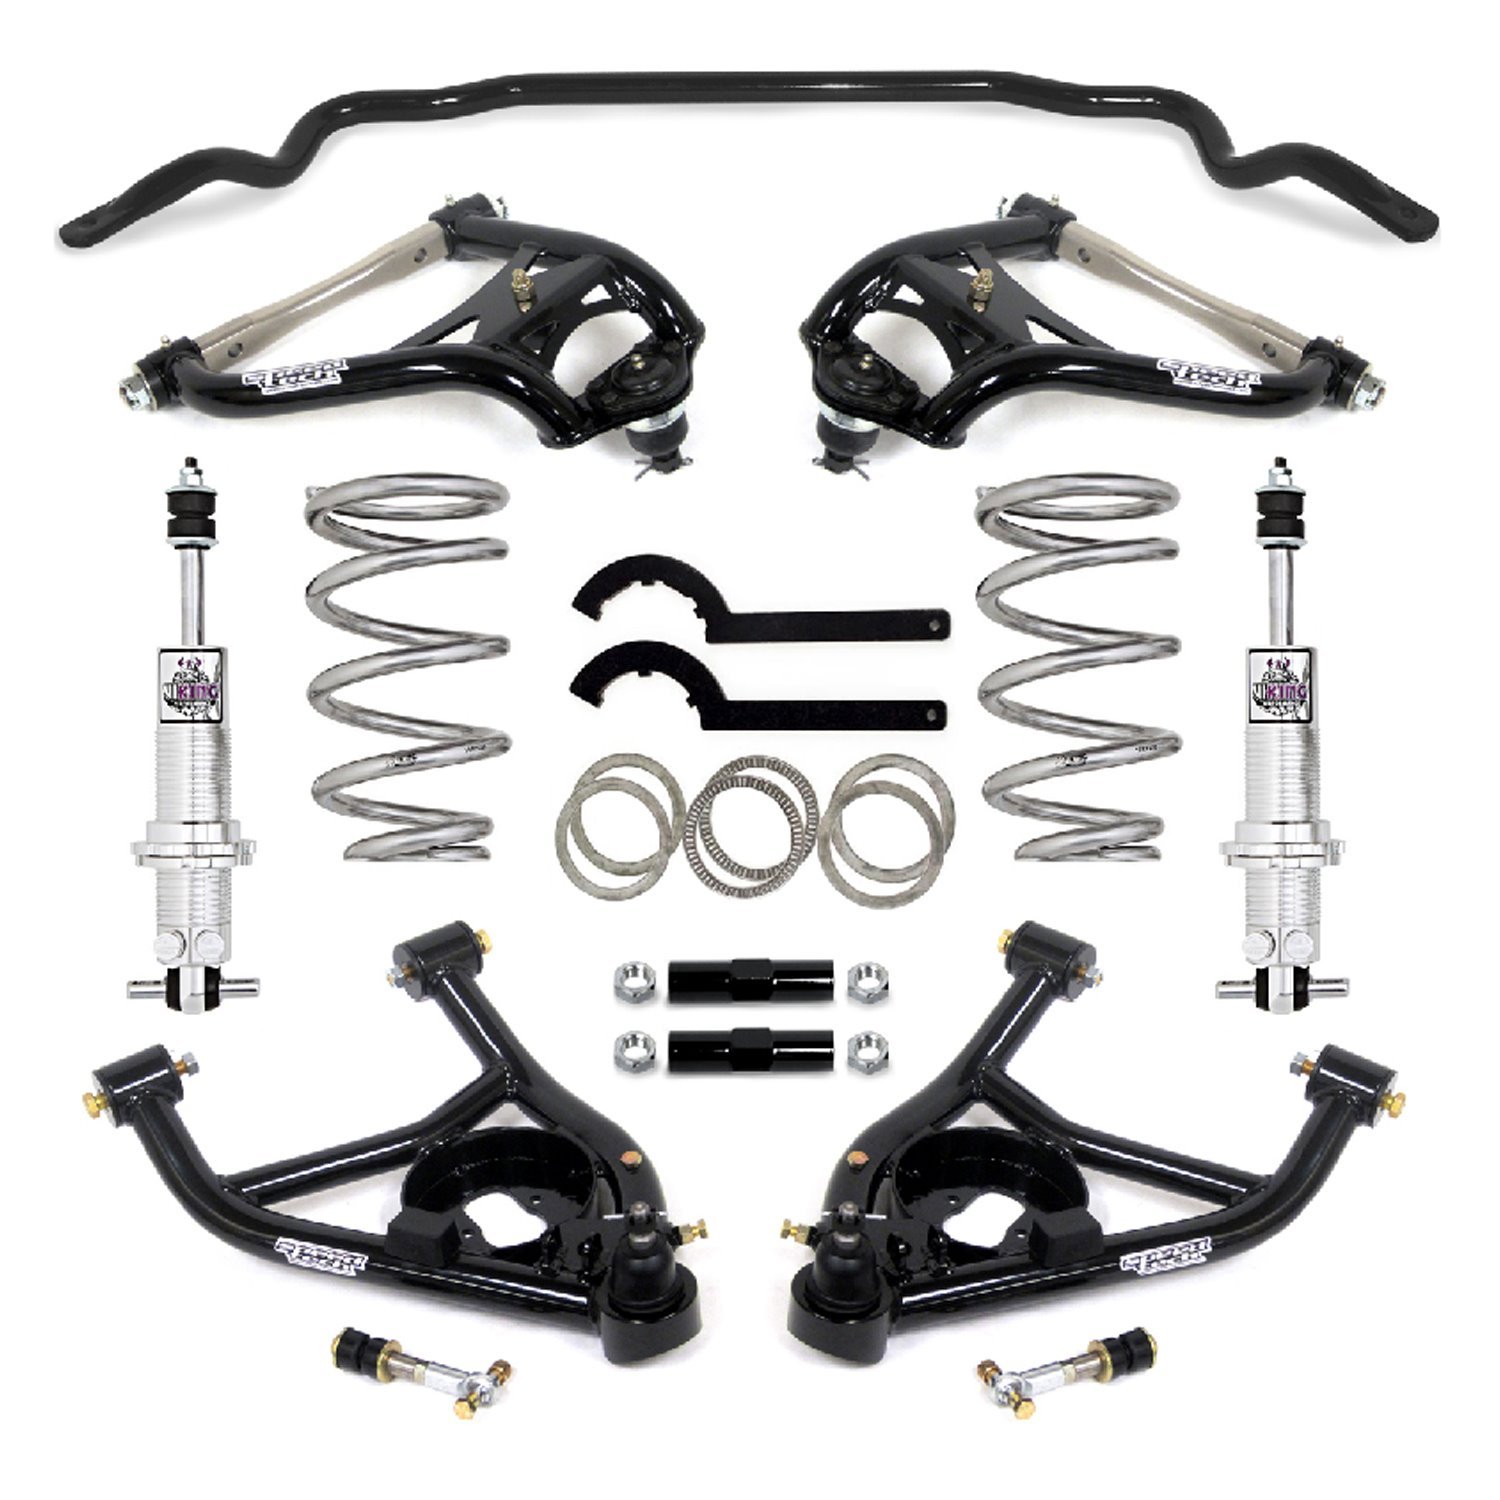 Road Assault Front Suspension Package 1967-69 Camaro / 1968-74 Nova with LS or Small Block Engine